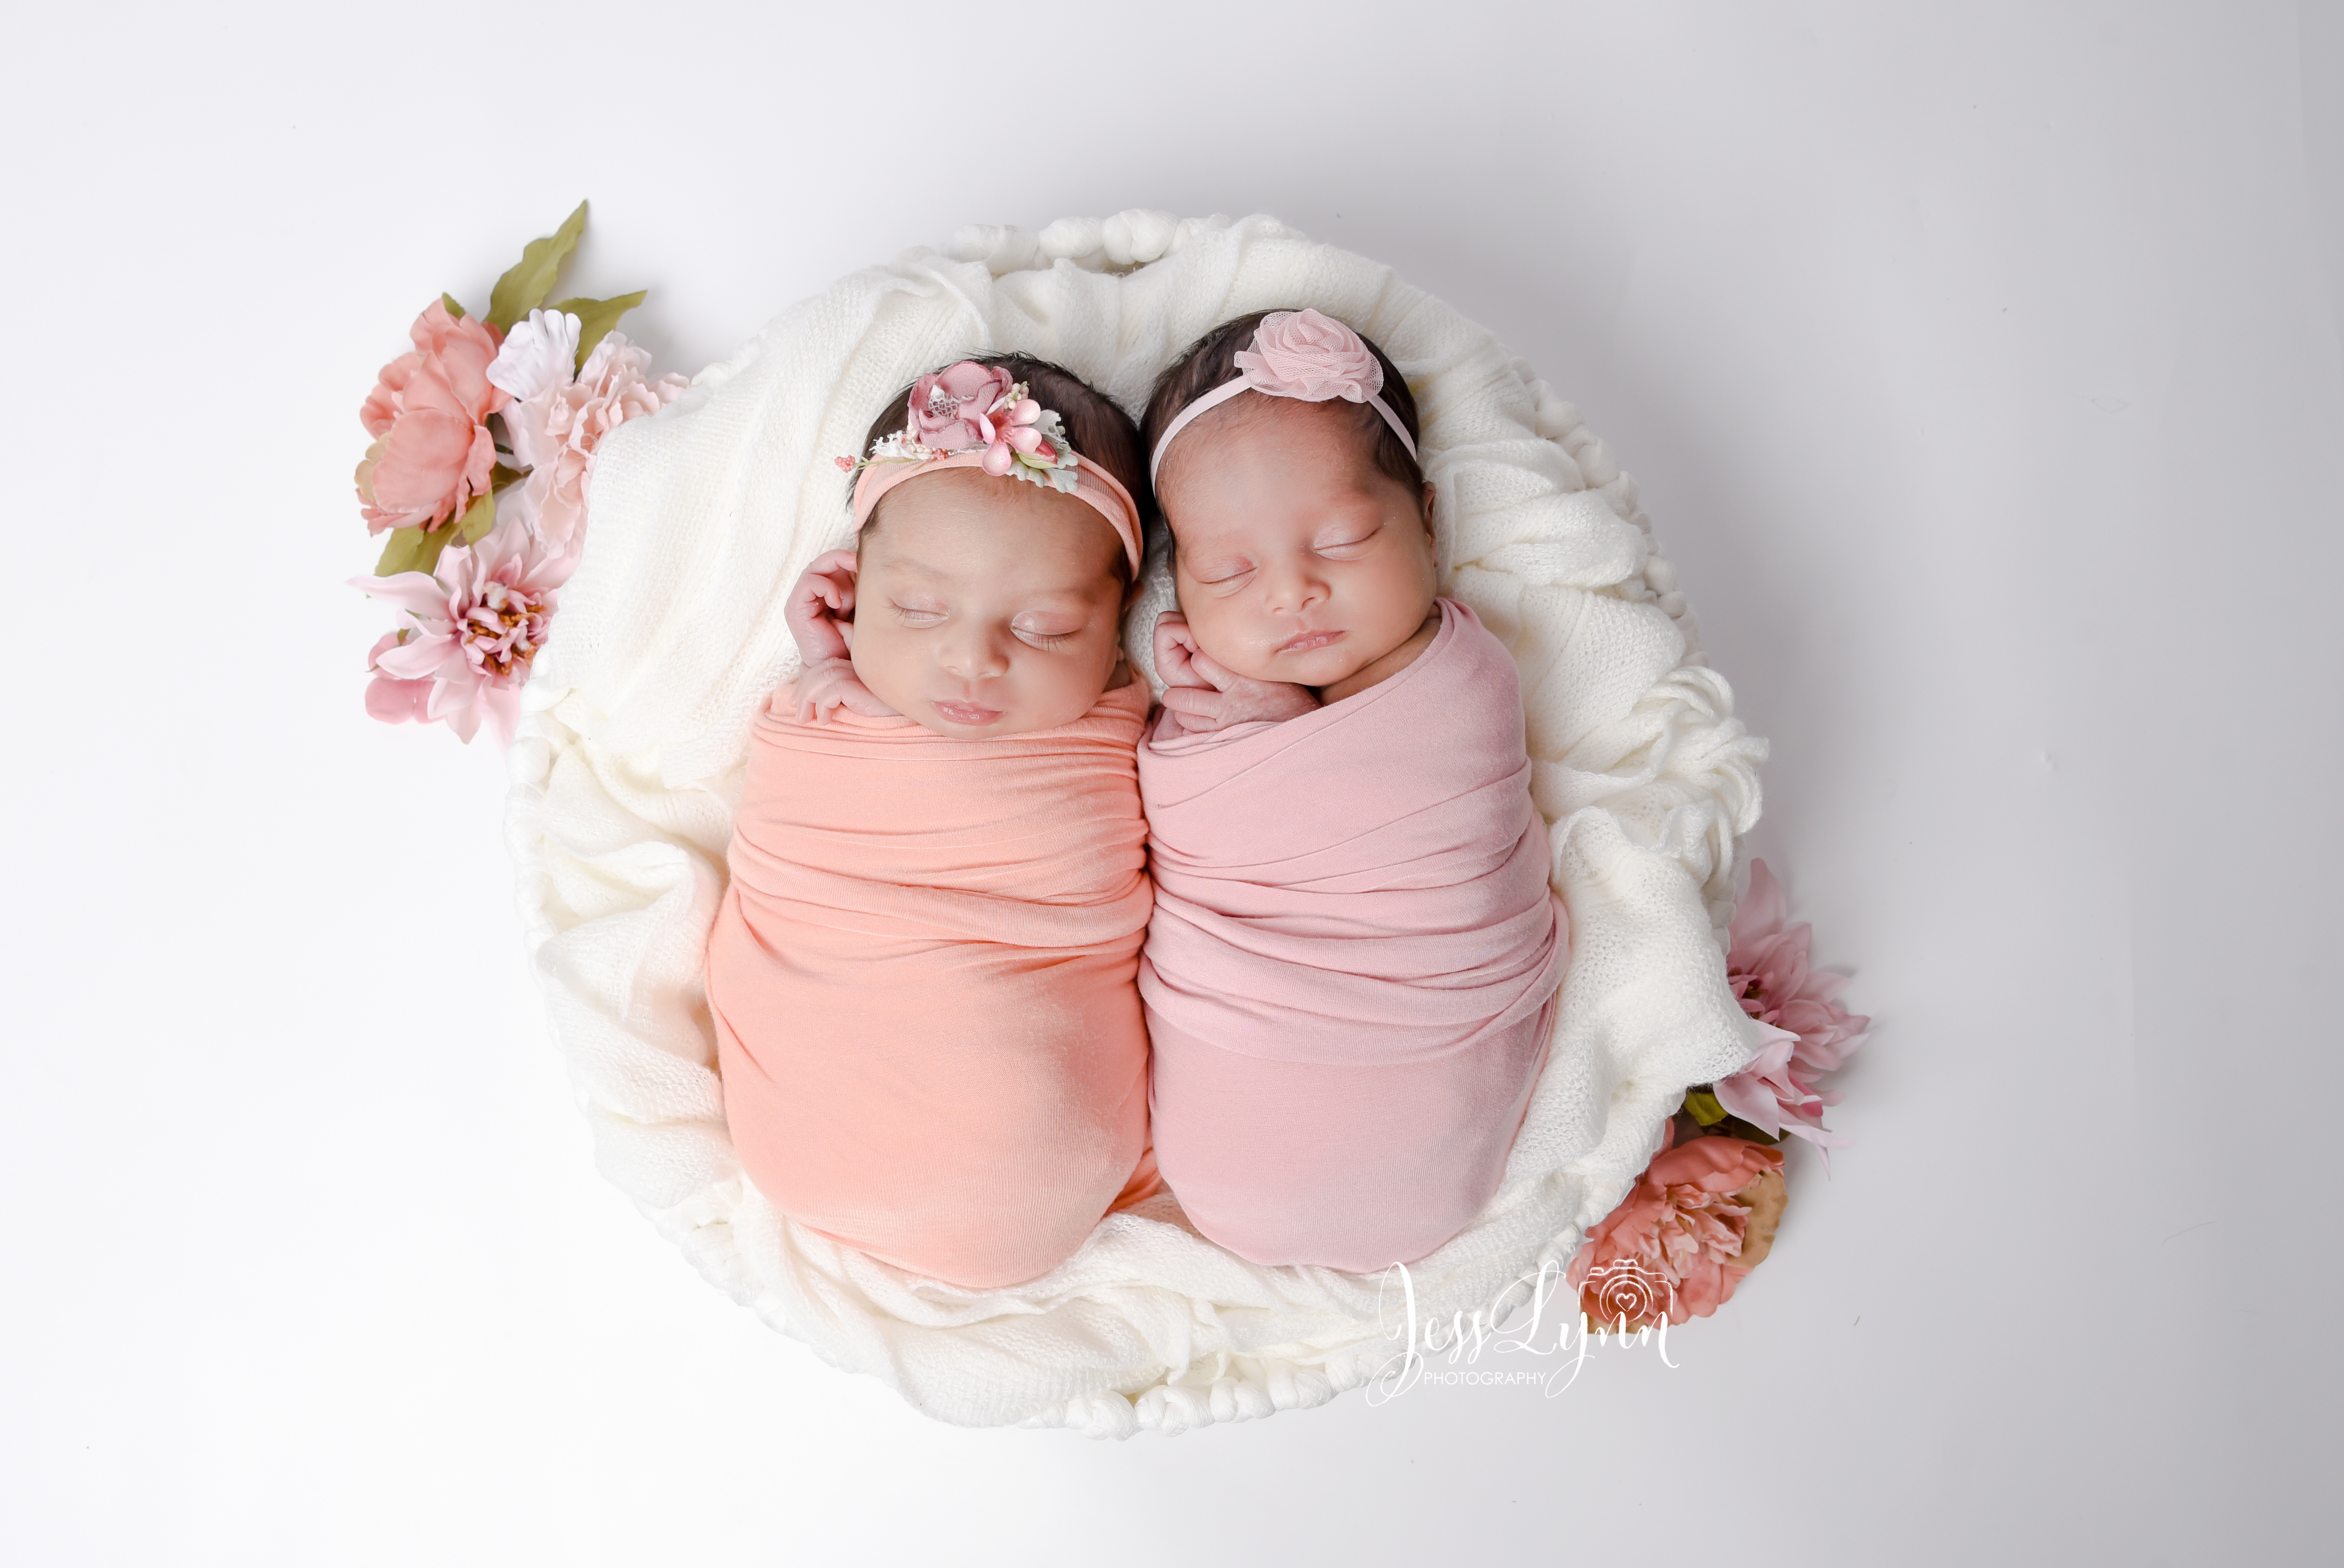 25 Most Beautiful & Cute Twins Baby Pictures | Twin baby girls, Cute baby  twins, Twin baby photos